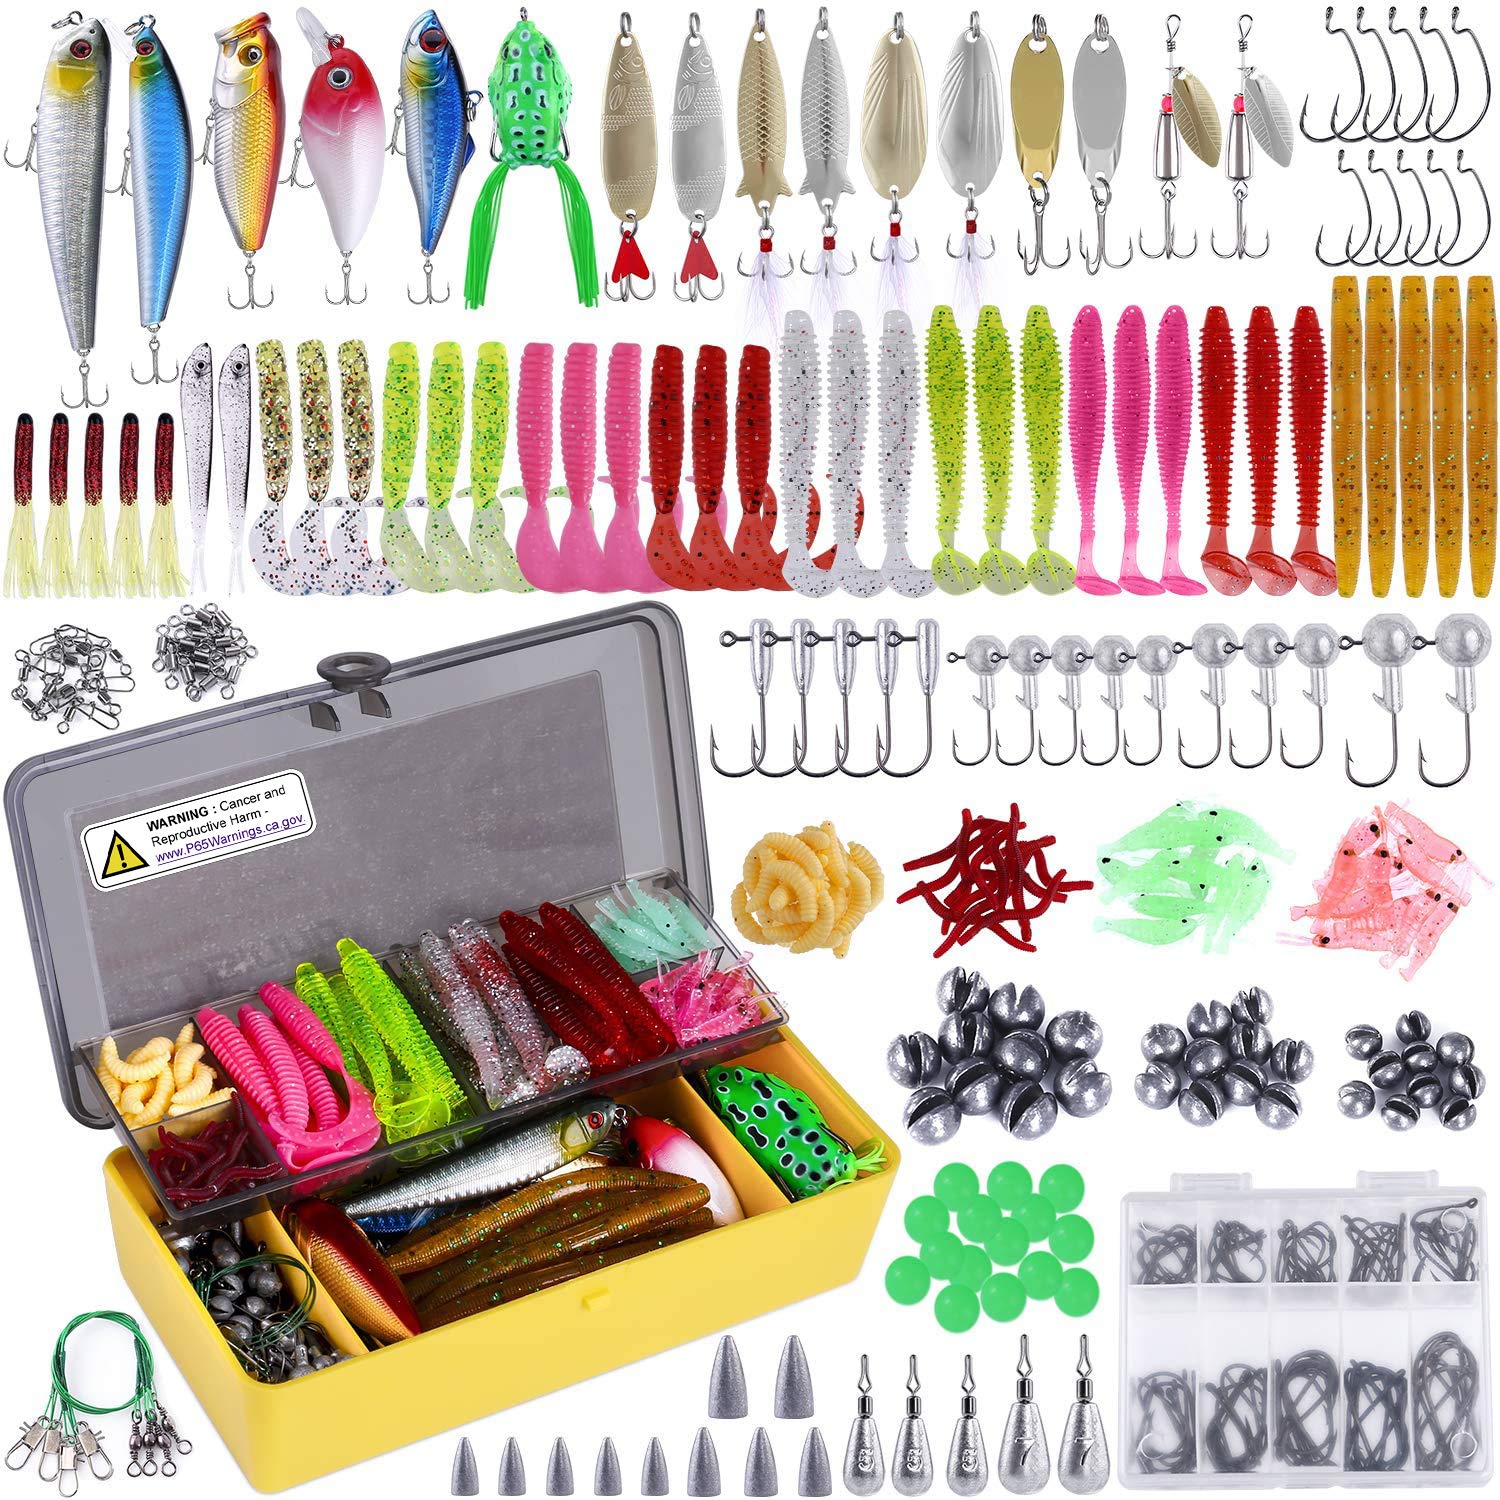 PLUSINNO Fishing Lures Baits Tackle Including Crankbaits, Spinnerbaits,  Plastic Worms, Jigs, Topwater Lures , Tackle Box and